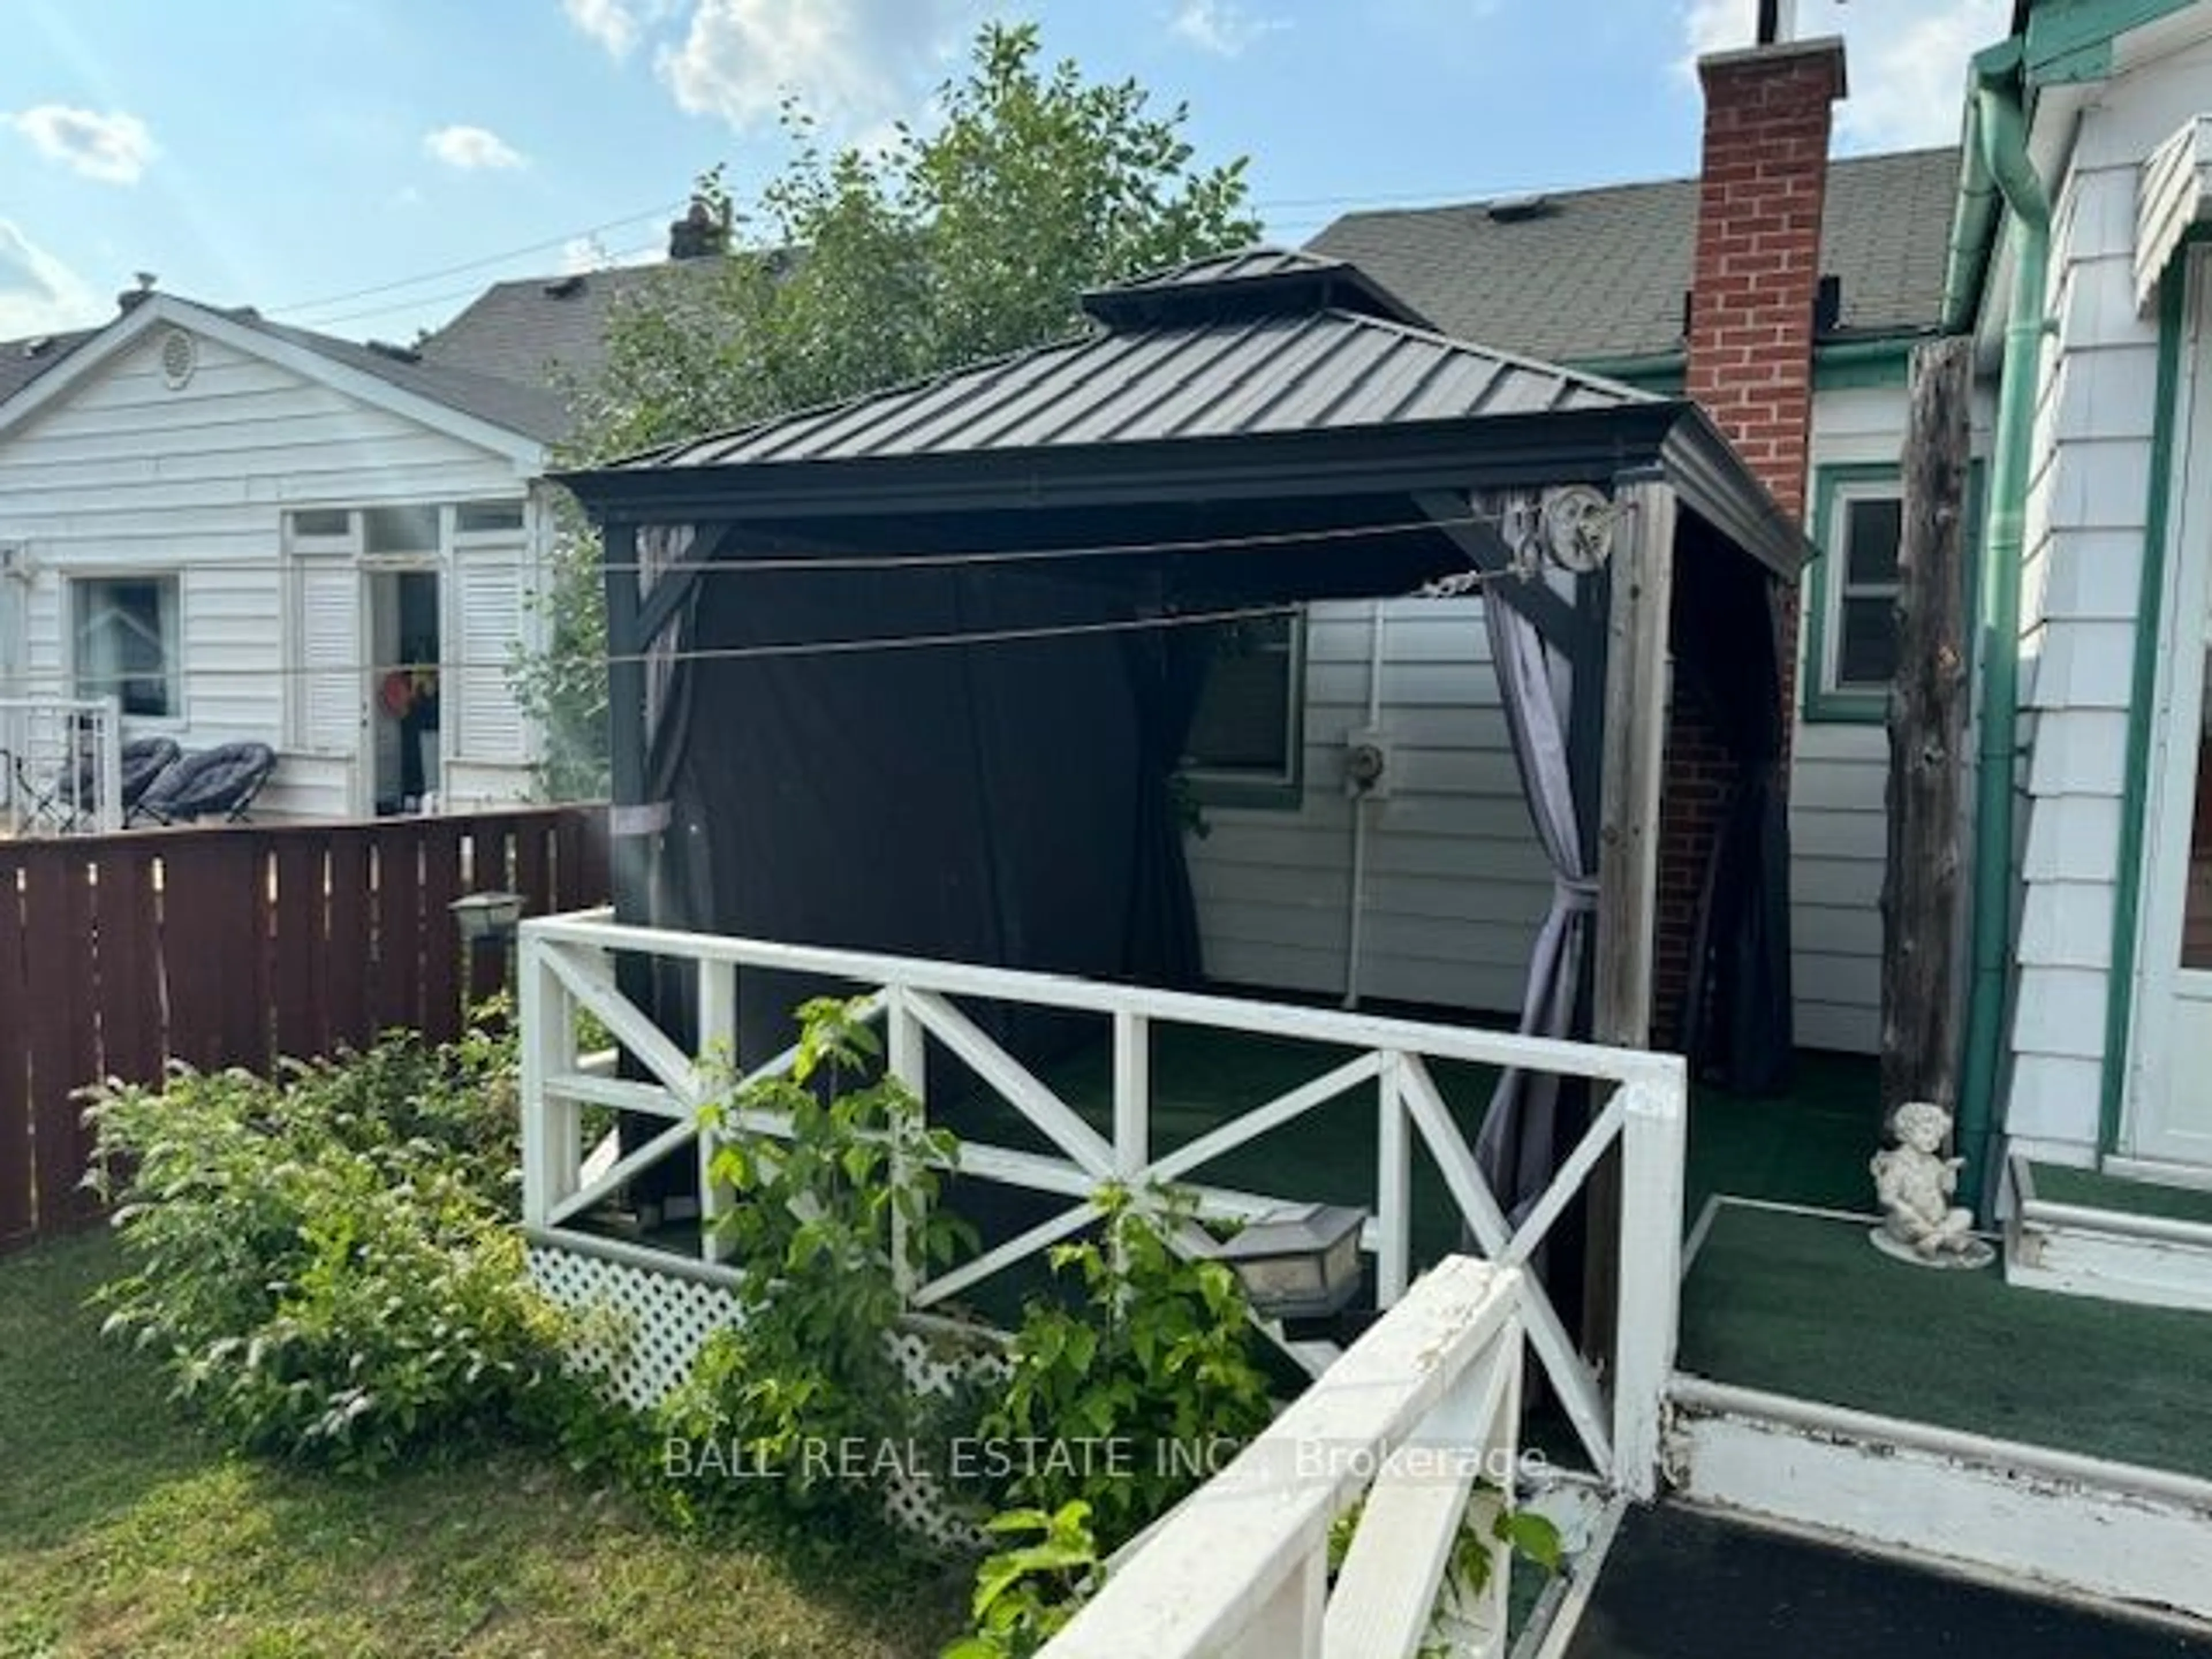 Shed for 541 Brioux Ave, Peterborough Ontario K9J 4G6